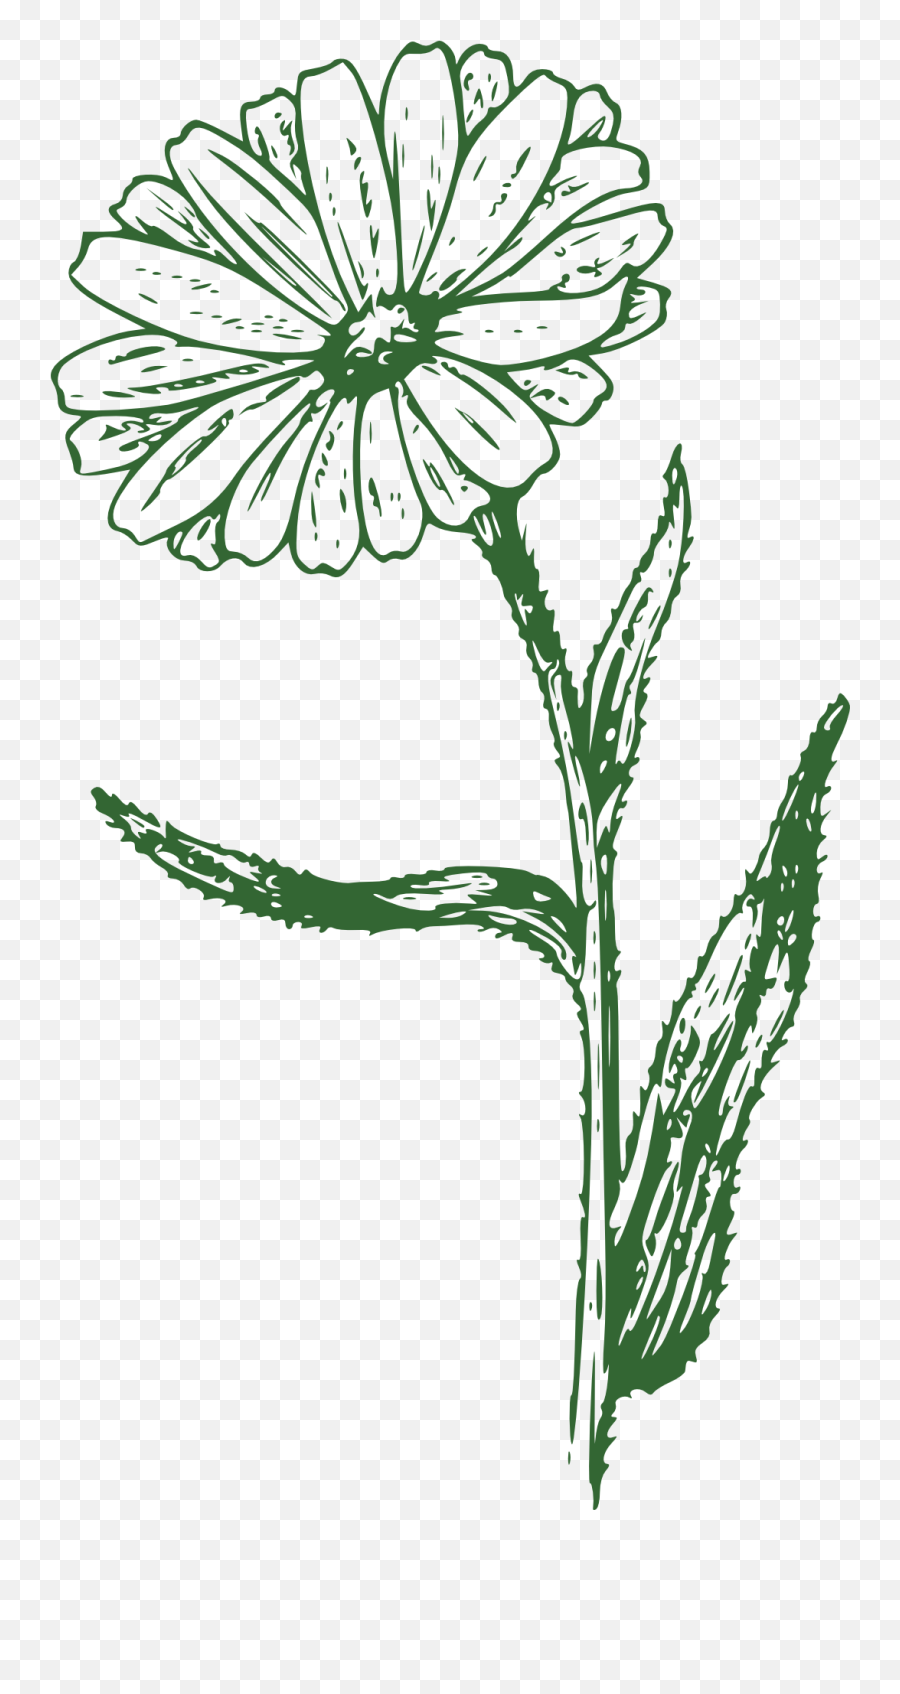 Drawing Of A Green Daisy On A White Background Free Image Emoji,White Daisy Png